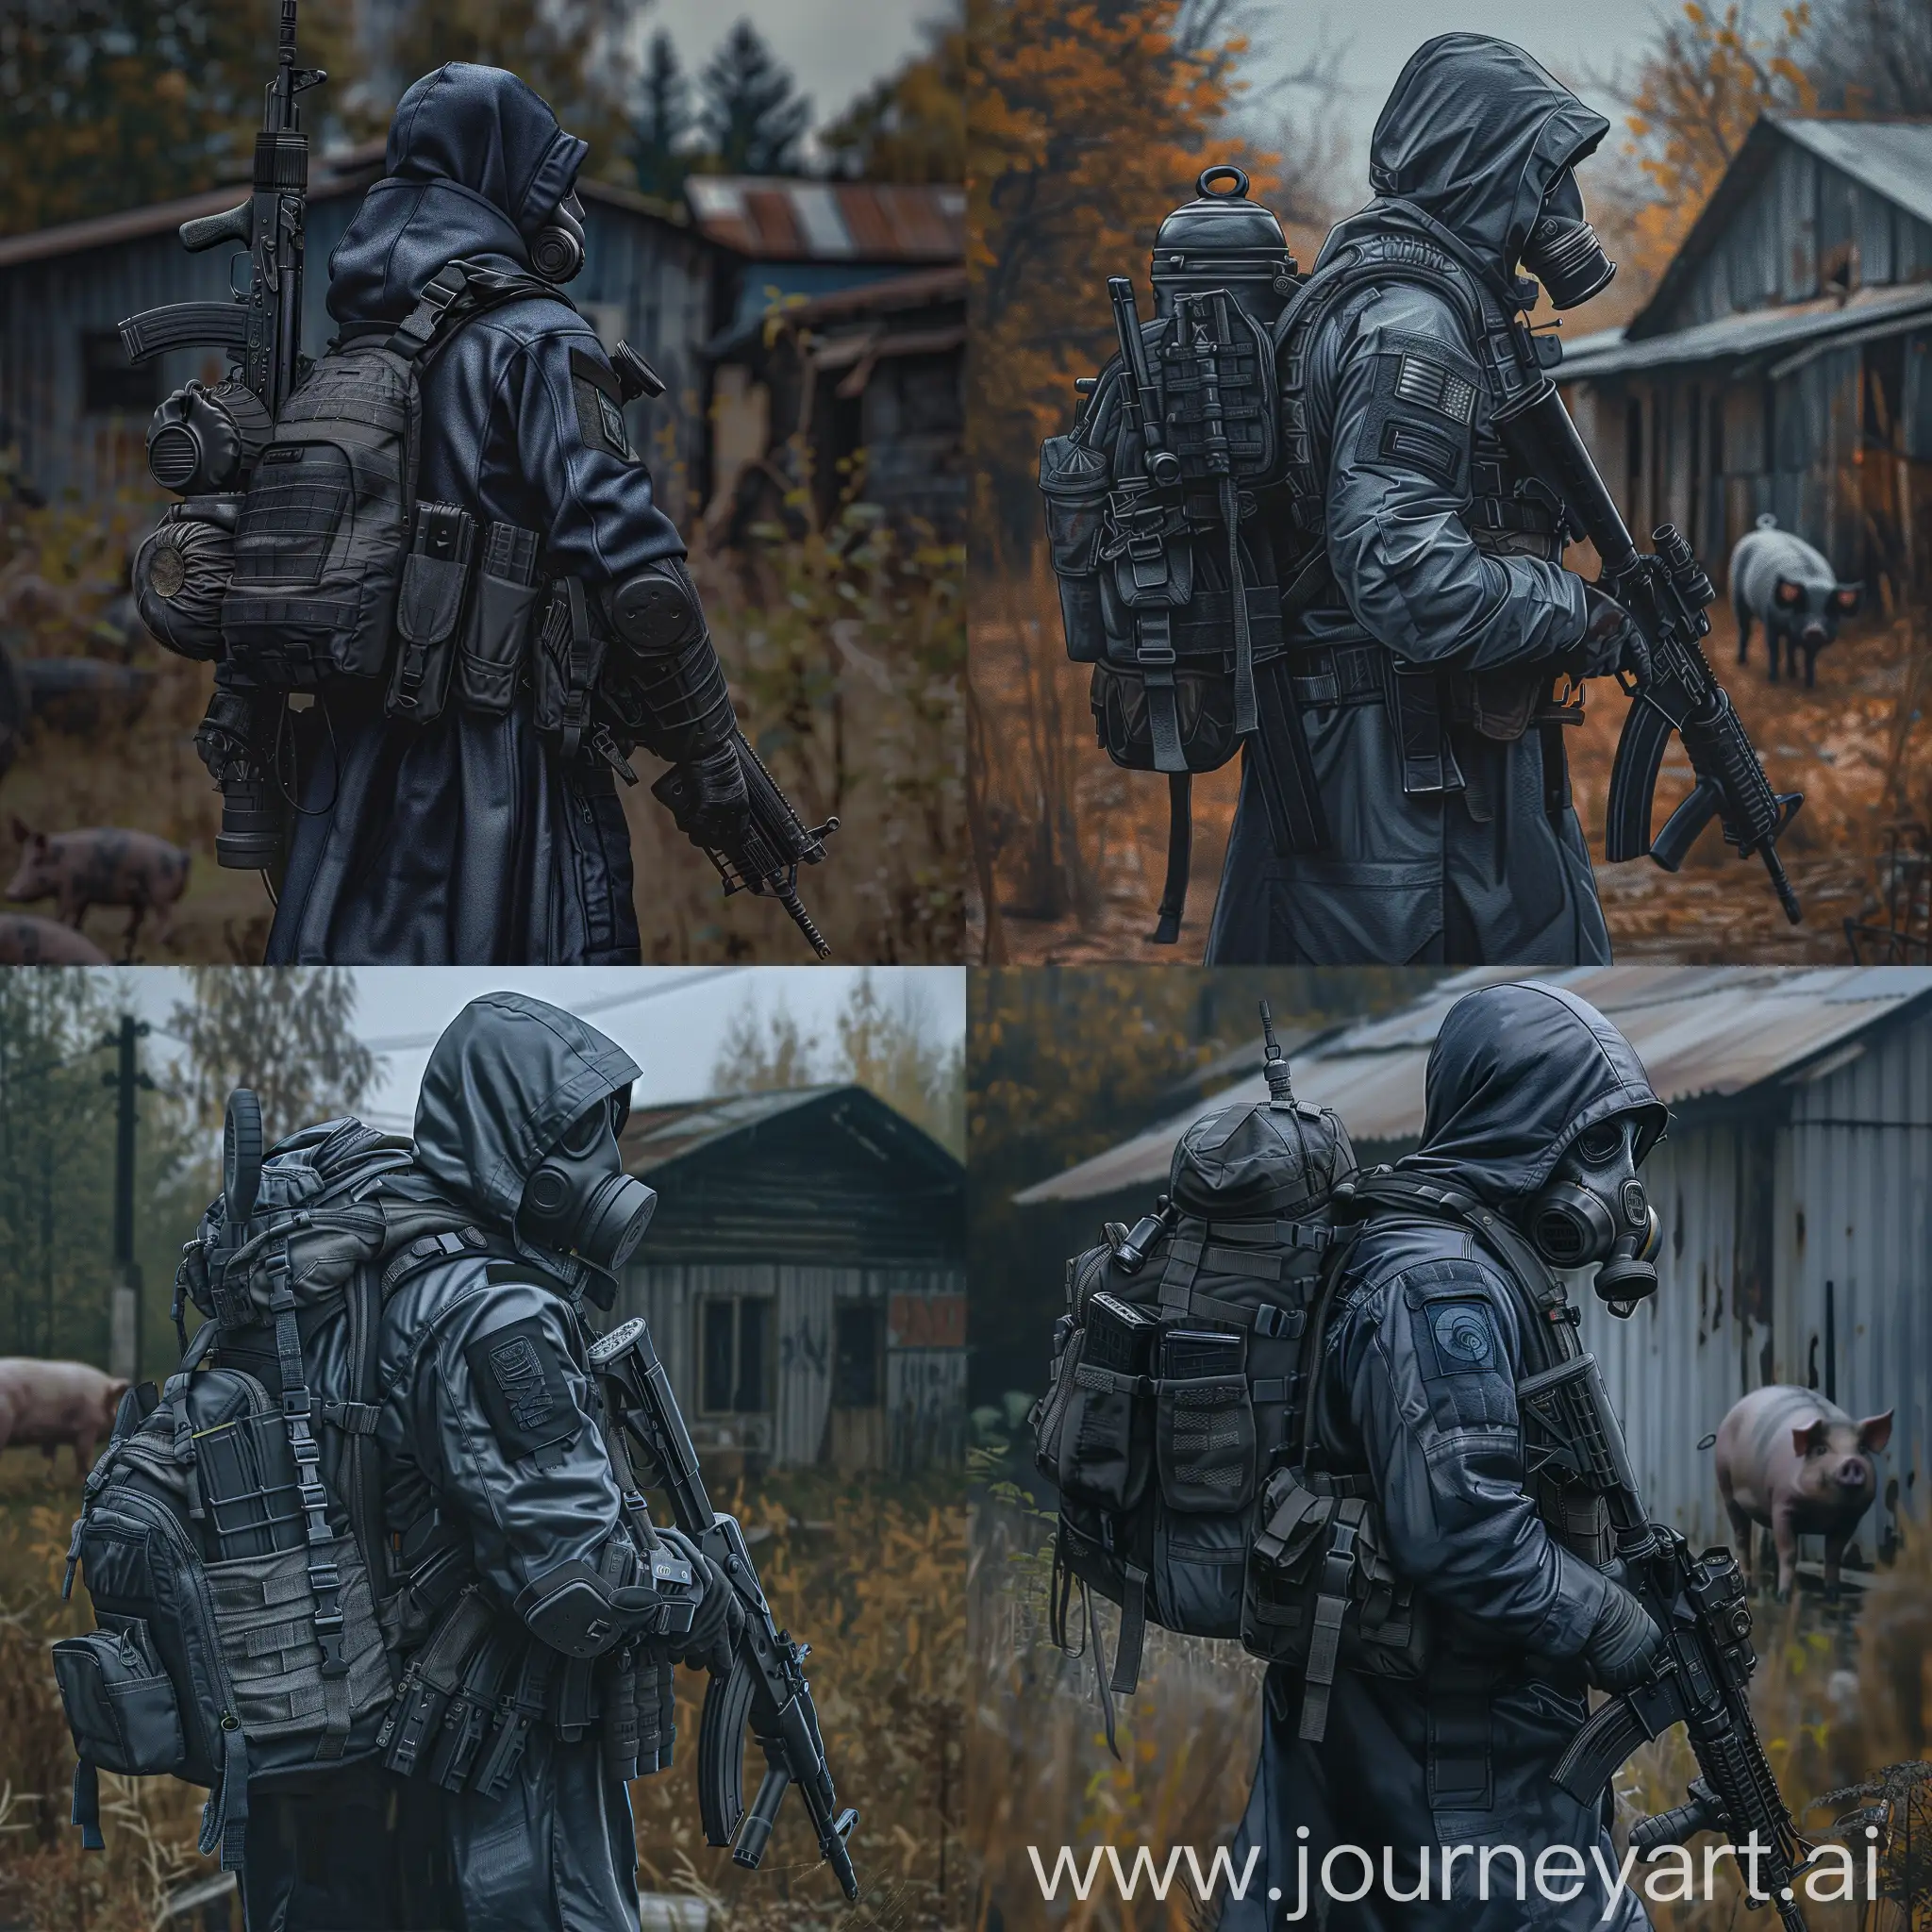 Digital art a mercenary from the universe of S.T.A.L.K.E.R., dressed in a dark blue military raincoat, gray military armor on his body, a gasmask on his face, a military backpack on his back, a rifle in his hands, he walk in abandoned soviet pig farm, gloomy autumn, evening.